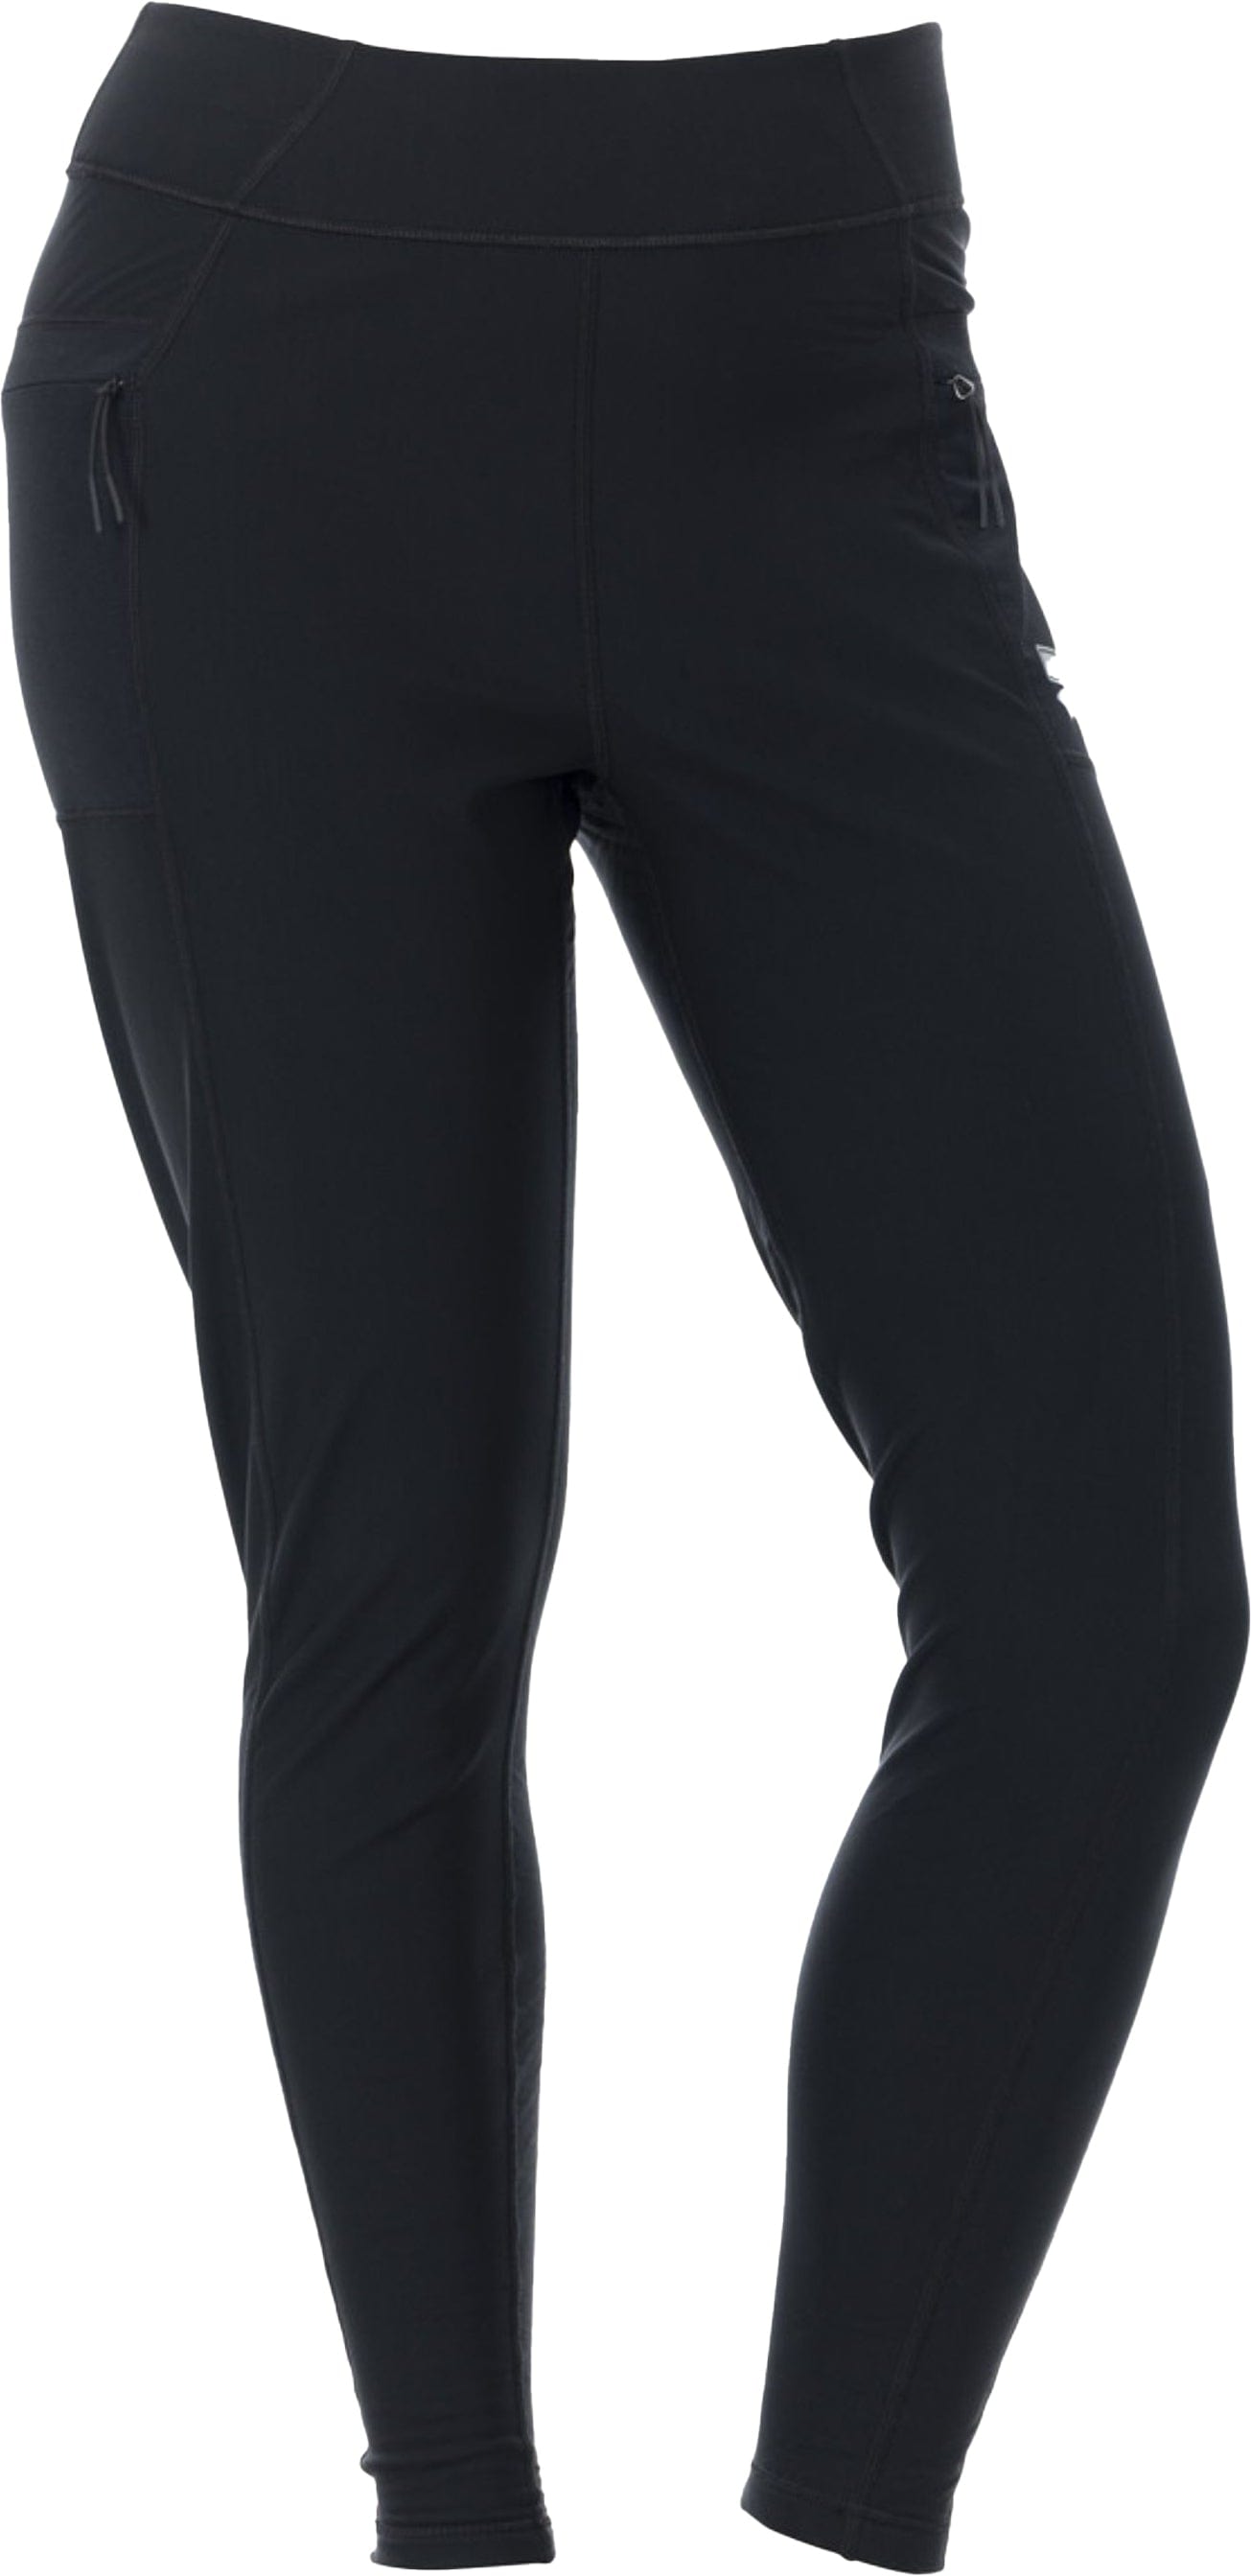 Cold Weather Leggings By DSG - Black / MD - 525980